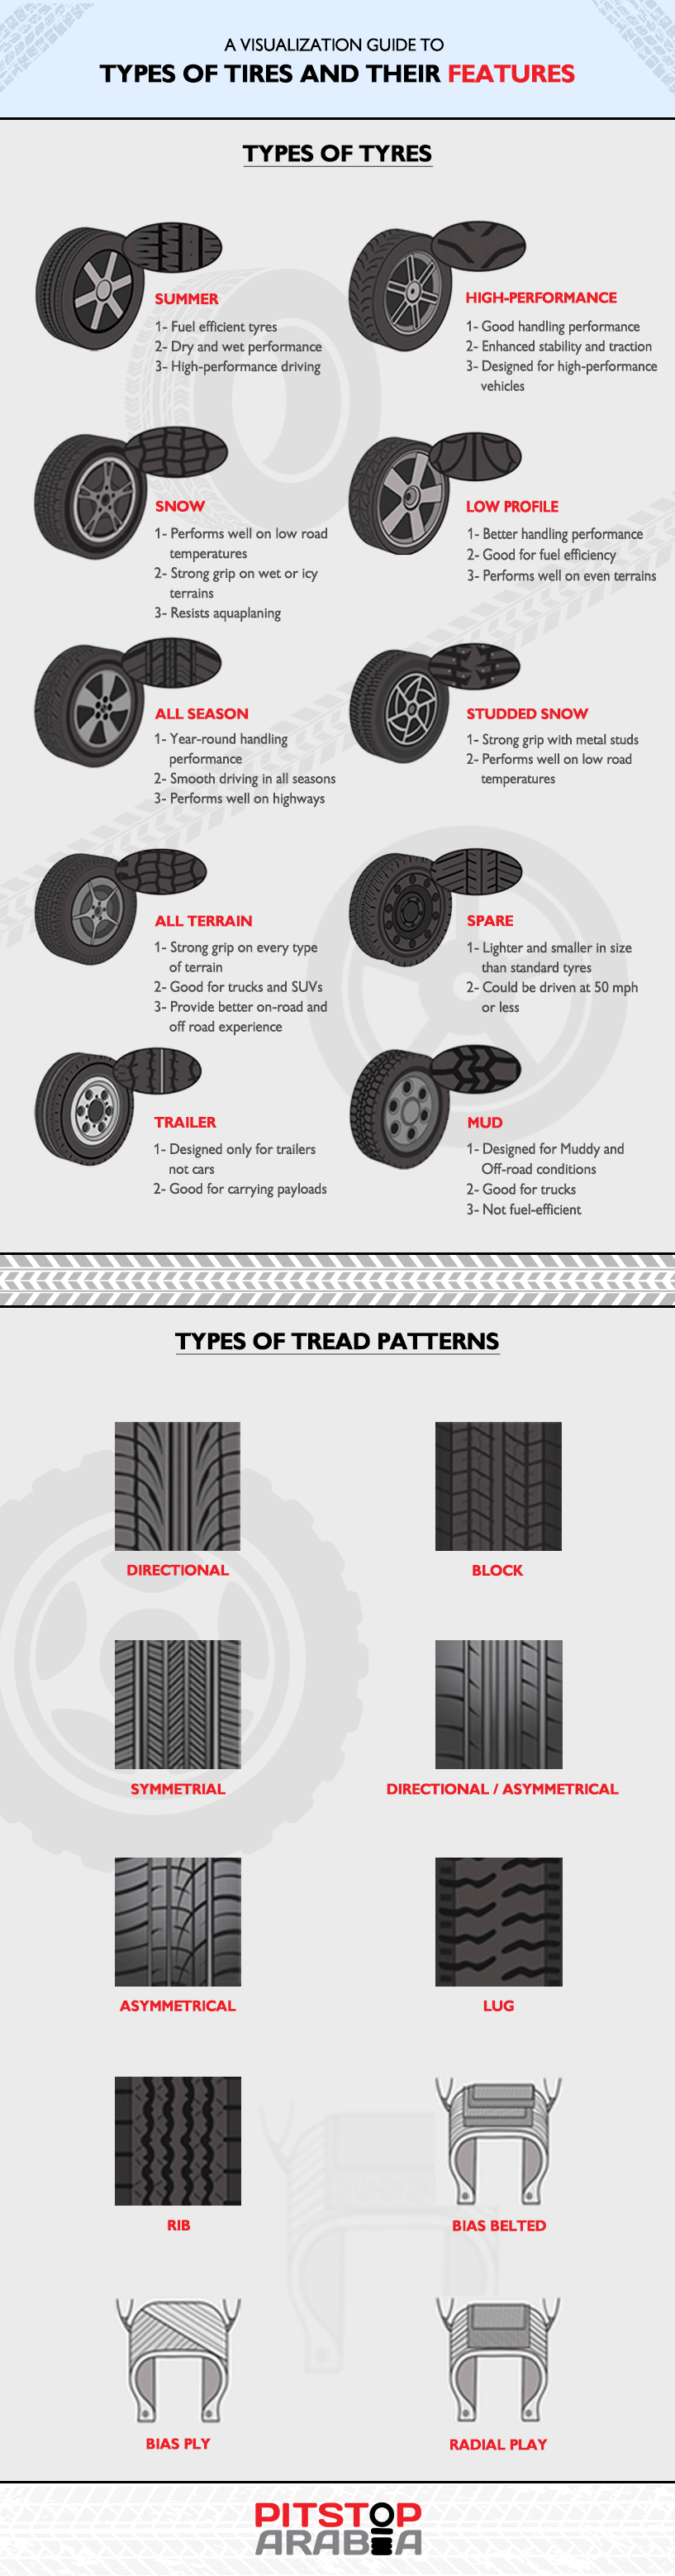 Types of Tyres and their Features Infographic